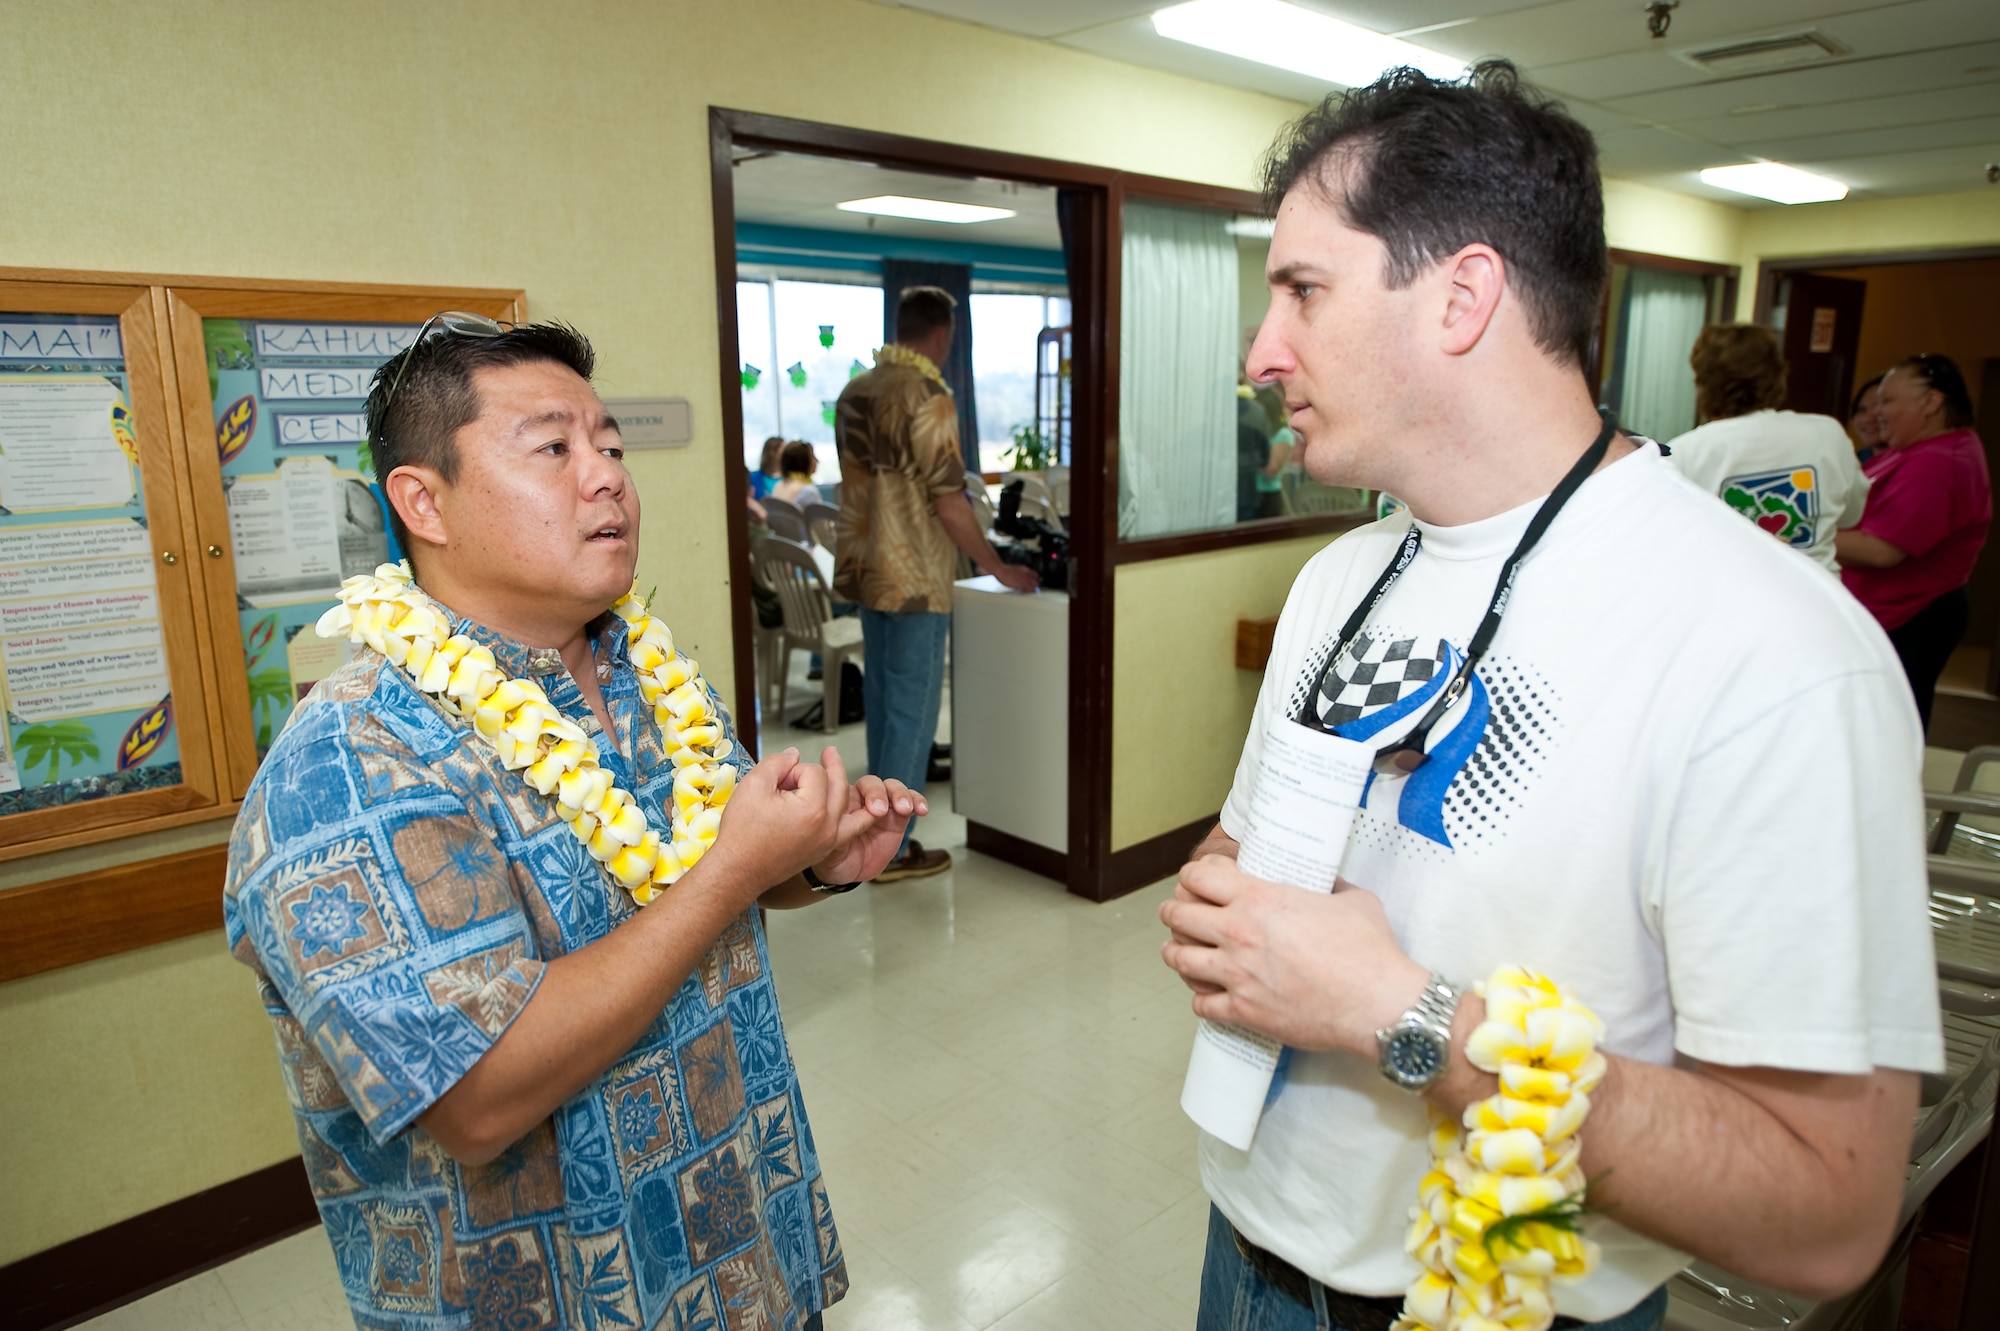 U.S. Air Force Major Joshua Wyte (right), Dentist, 140th Medical Group, Buckley Air Force Base, speaks with U.S. Air Force Capt. Jason Iyomasa, Program Coordinator for the Hawaii Air National Guard about the dental clinic at the Kahuku Medical Center, Kahuku, Hawaii, March 14, 2010. Wyte and his dental team from the Colorado Air National Guard are providing dental services as a part of the Office of the Assistant Secretary of Defense for Reserve Affairs Innovative Readiness Training Program, E Malama Kakou (translated from Hawaiian as “to care for all”). (U.S. Air Force photo/Master Sgt. John Nimmo, Sr.) (RELEASED)